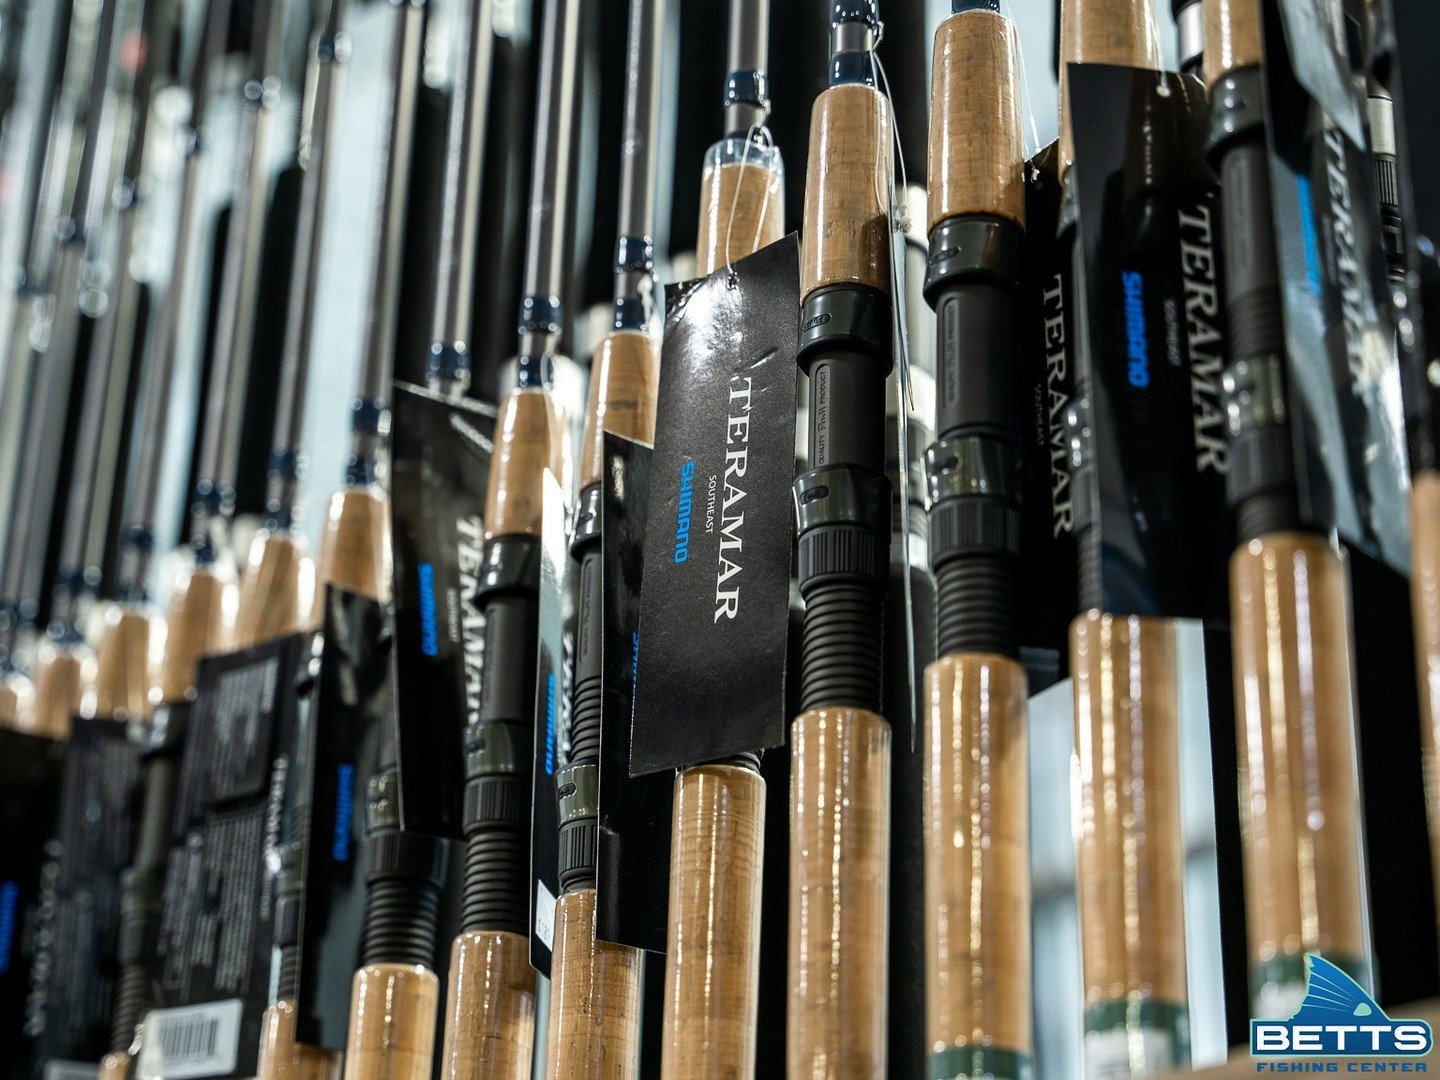 Searching for your next trusty fishing rod? Swing by Betts and chat with one of our knowledgeable team members. We're here to offer expert advice and help you find the perfect rod for your next fishing adventure. Your satisfaction is our priority!

#